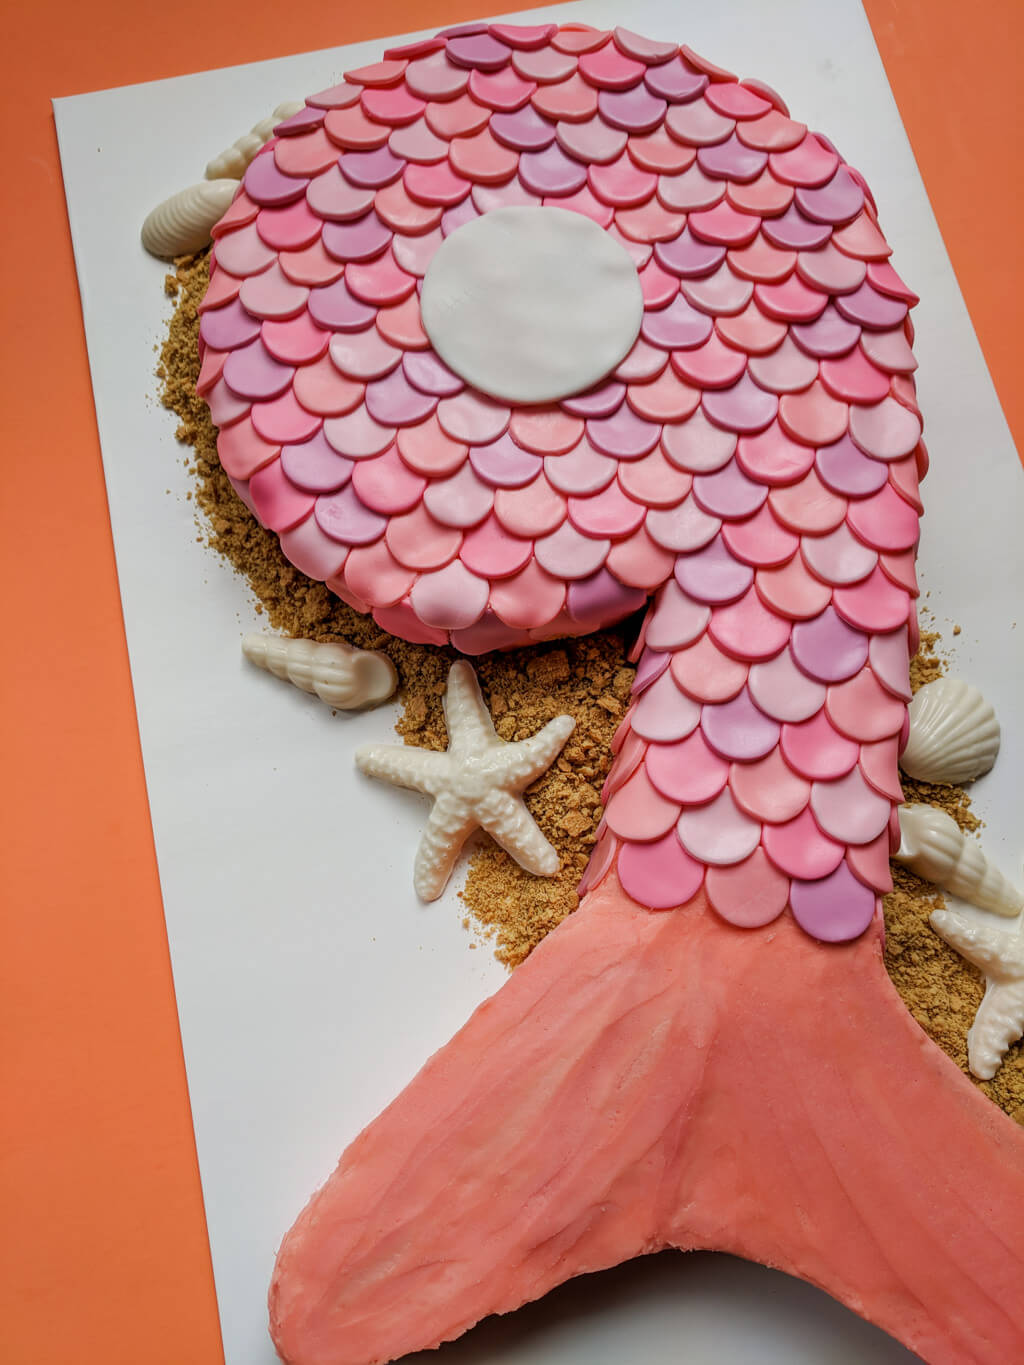 Mermaid cake with scales and tail